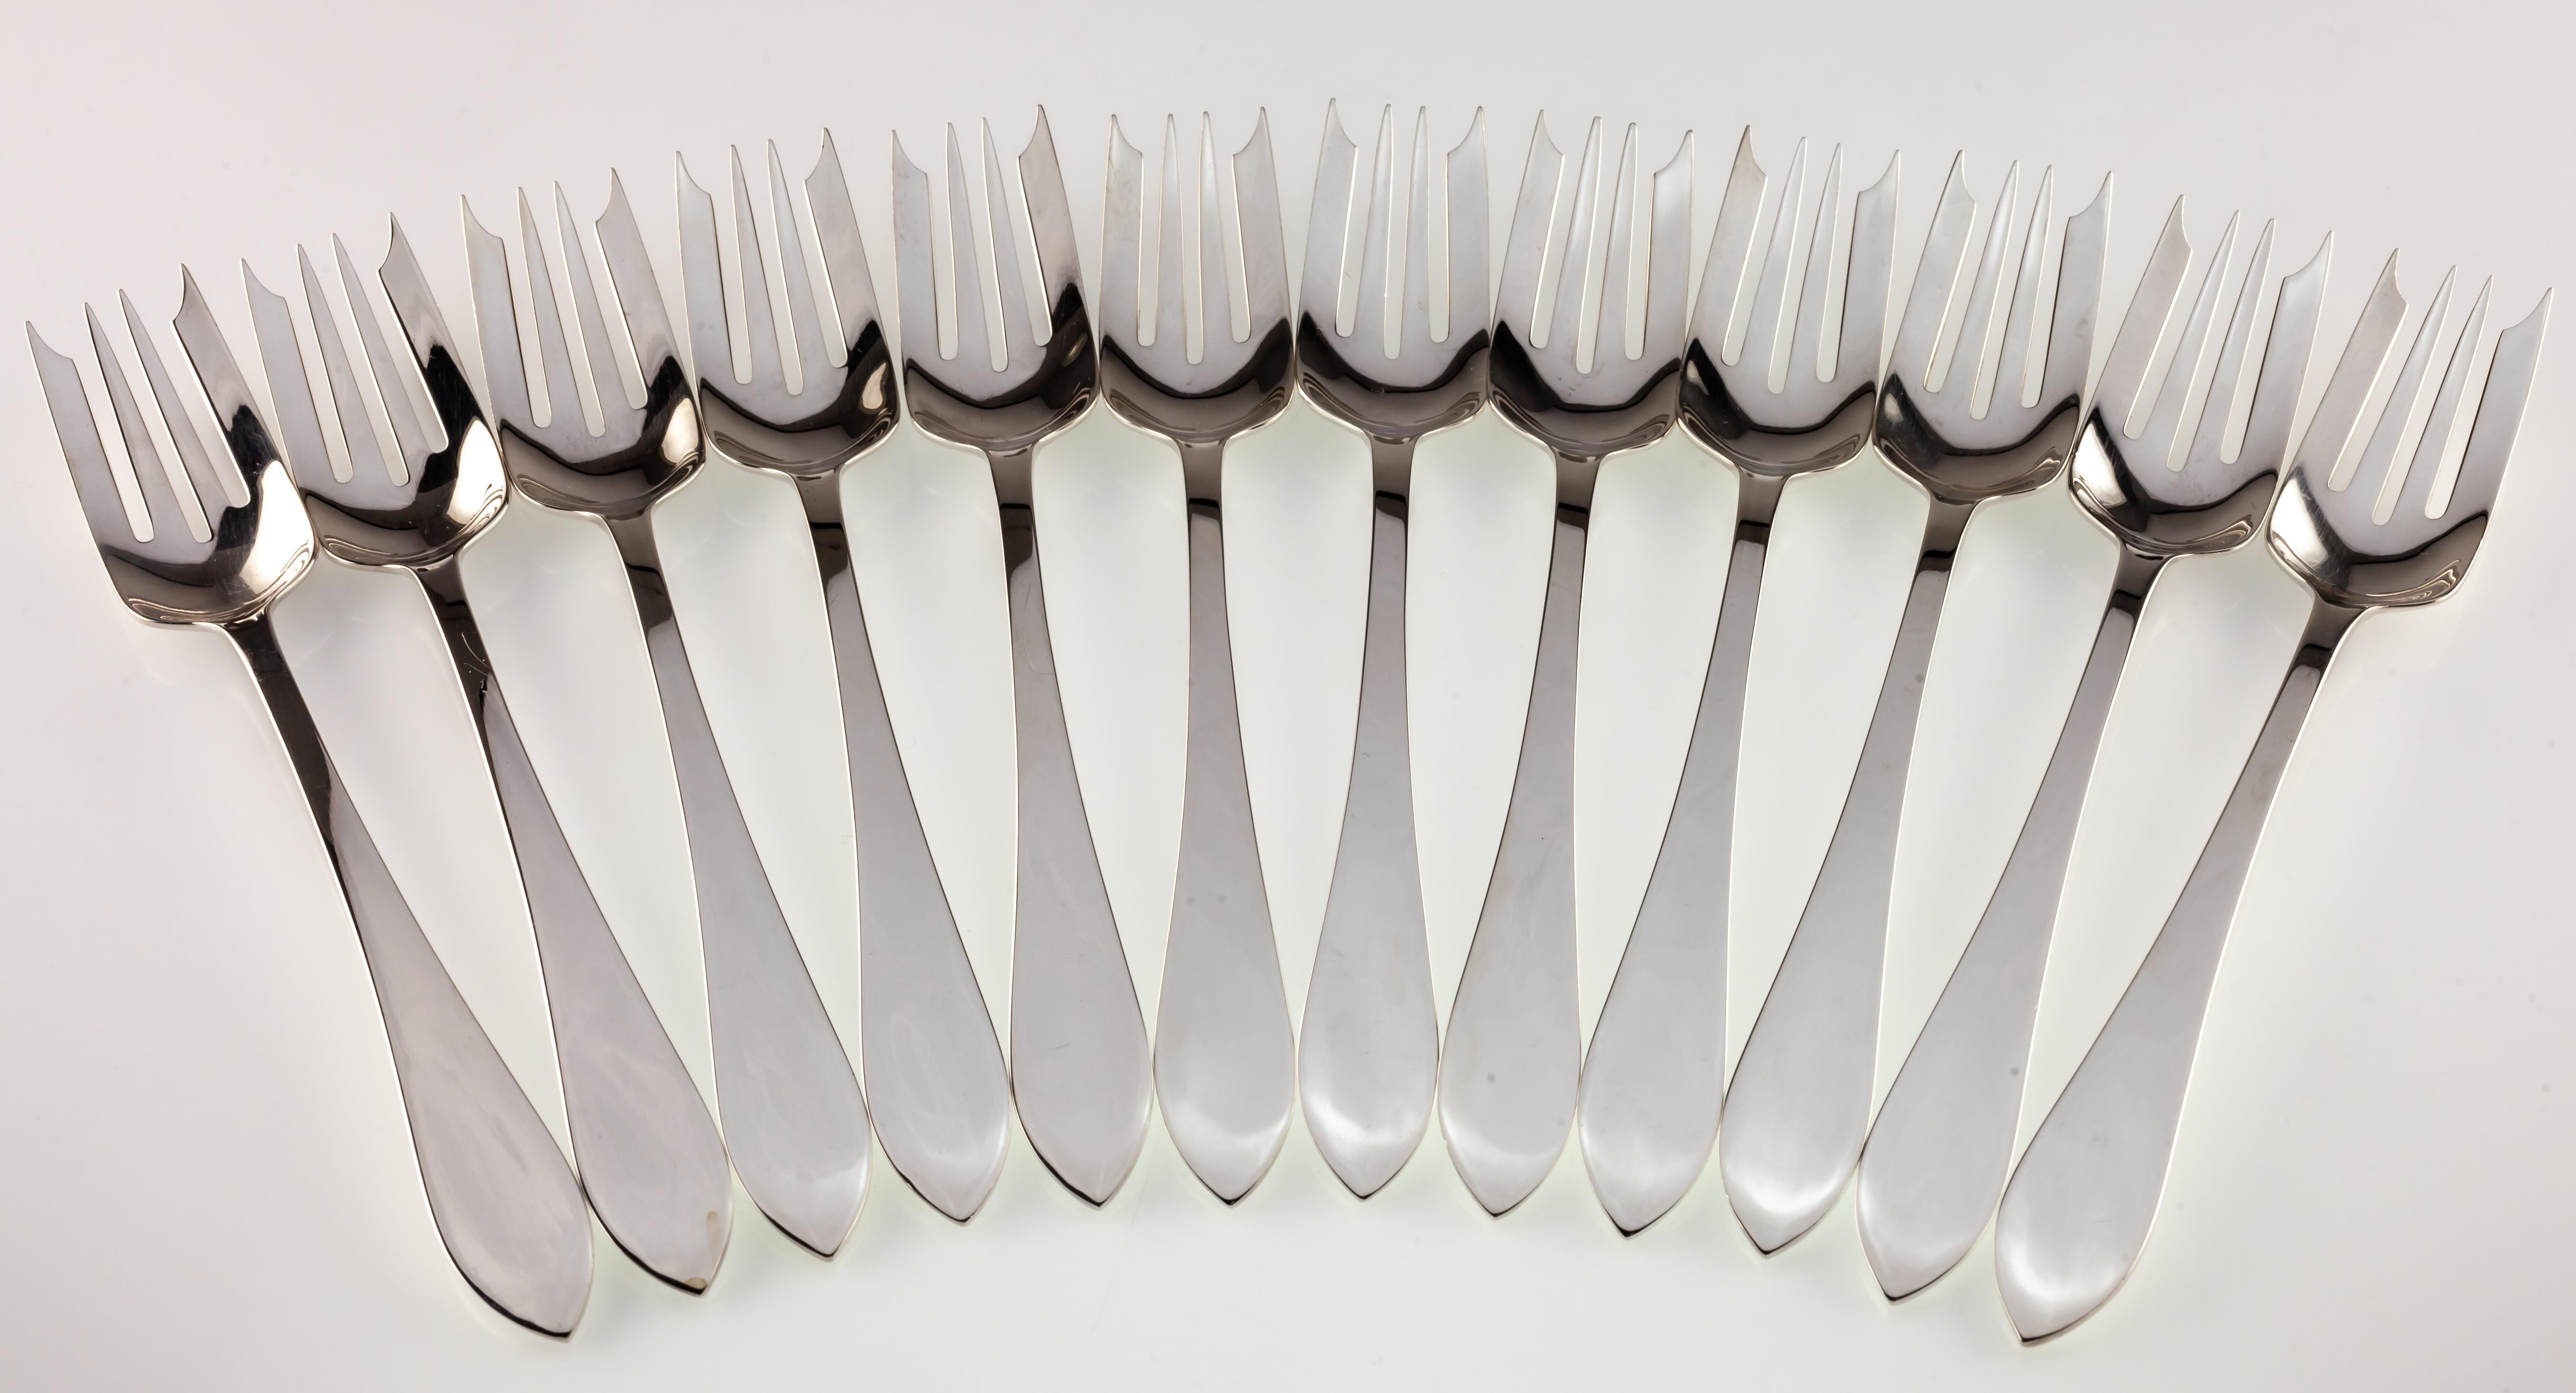 Gorgeous Tiffany & Co. Sterling Silver Faneuil Flatware Set
Contains 60 Pieces Total (Service for 12)
Set Includes:
12 Blunt Hollow Knives (9 3/8